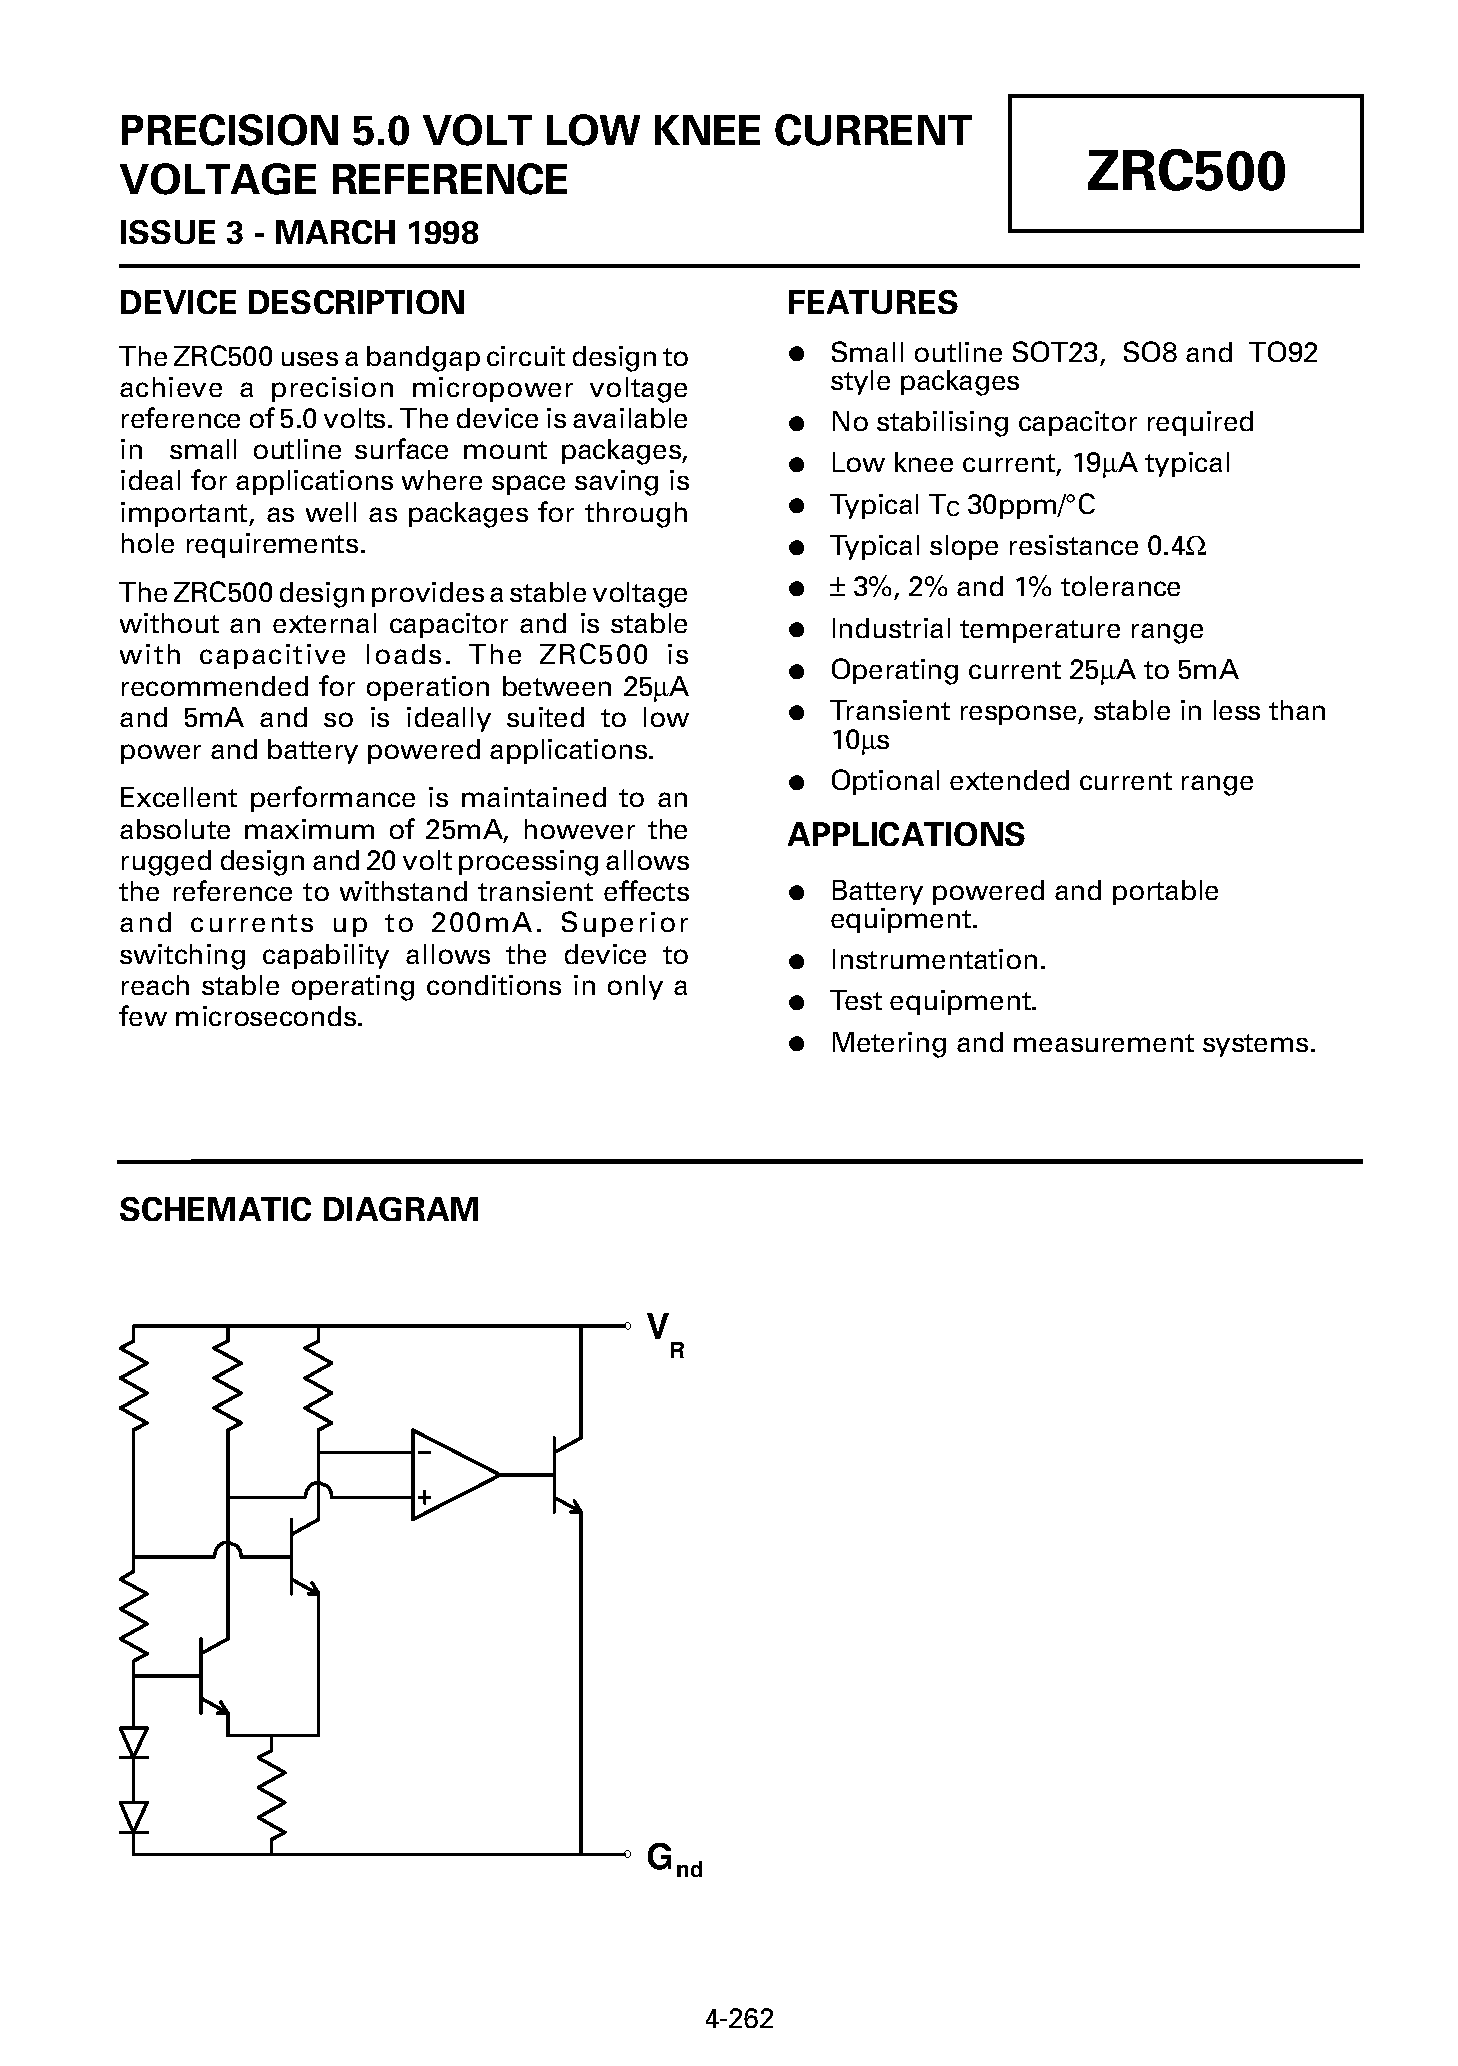 Datasheet ZRC500R02 - PRECISION 5.0 VOLT LOW KNEE CURRENT VOLTAGE REFERENCE page 1